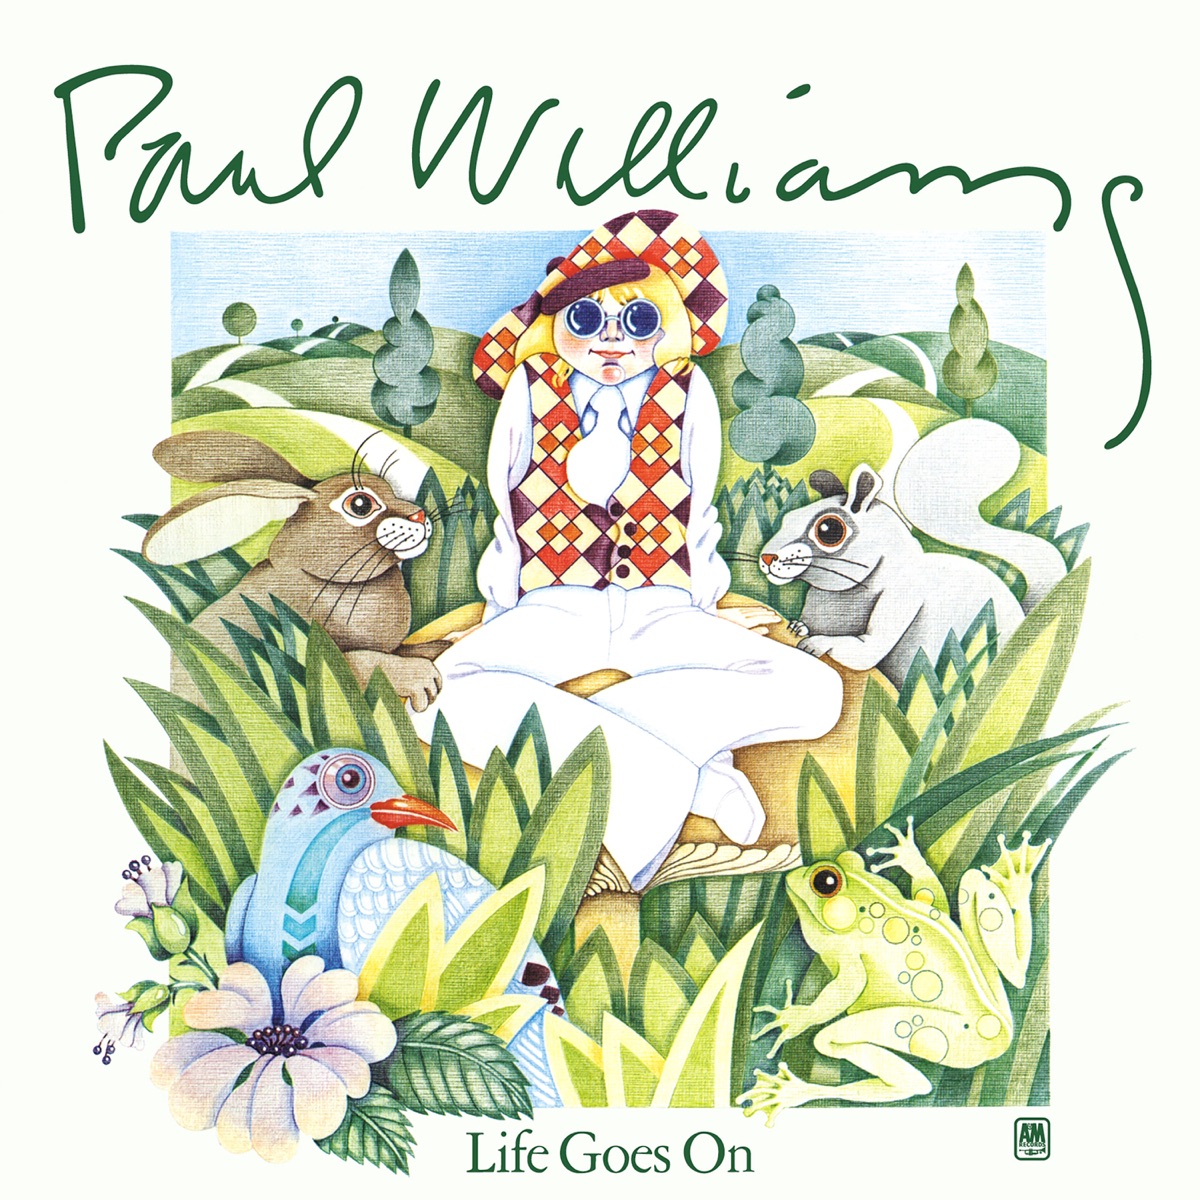 Evergreens - The Best of the A&M Years - Album by Paul Williams